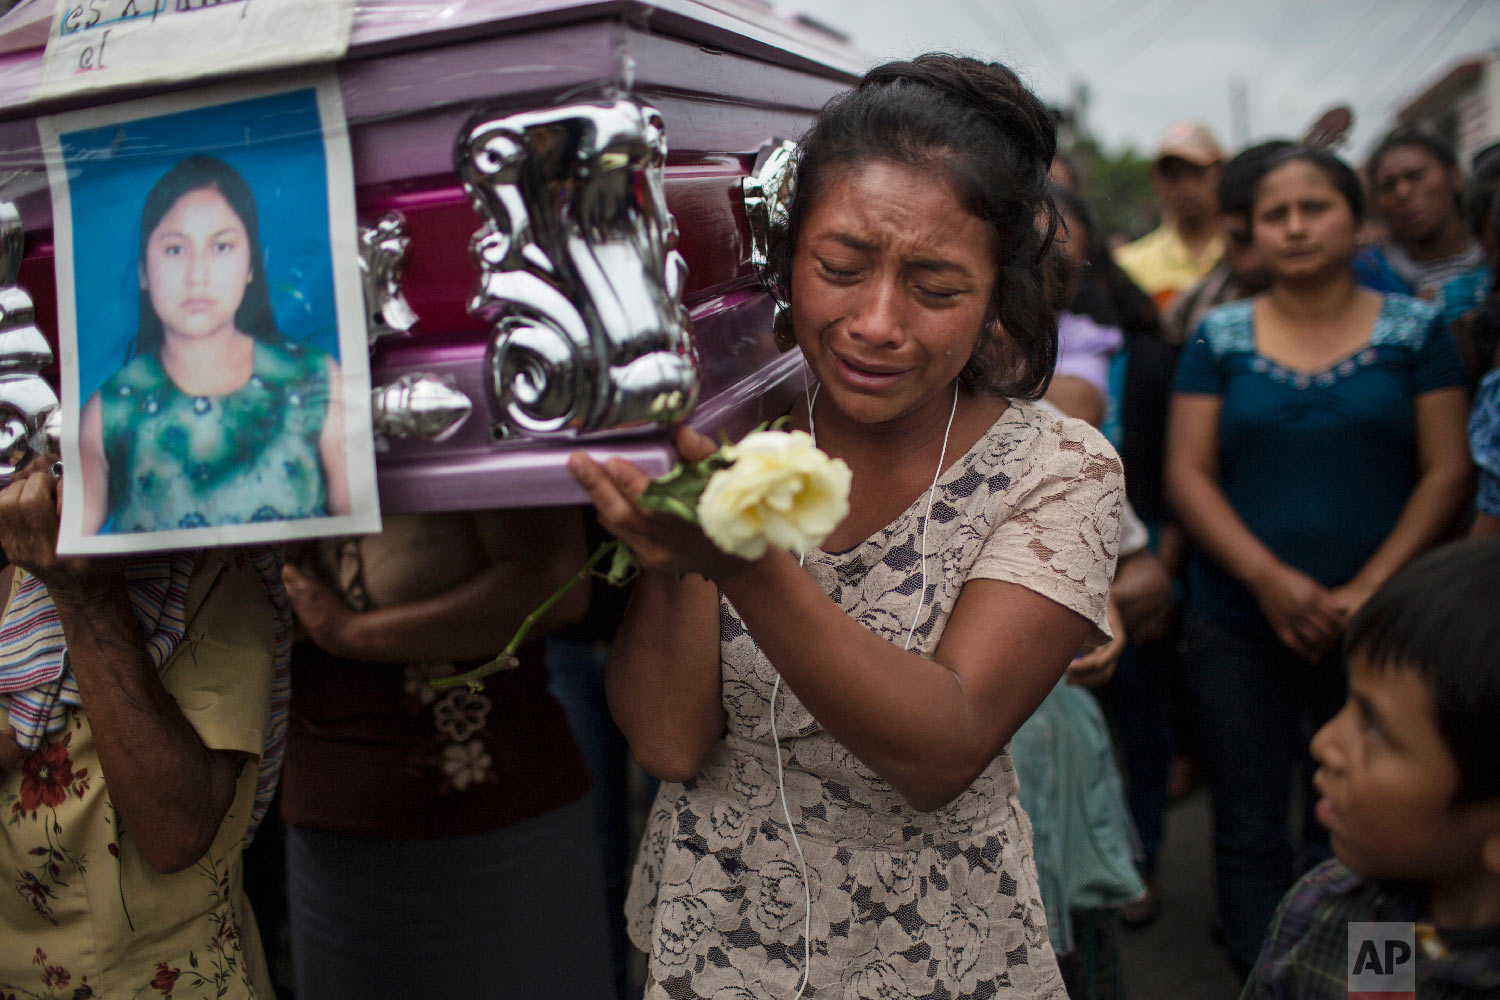  Yoselin Rancho cries while carrying the remains of her best friend, Etelvina Charal, who died in the eruption of the Volcan de Fuego, or "Volcano of Fire," in San Juan Alotenango, Guatemala, on June 10, 2018. (AP Photo/Rodrigo Abd) 